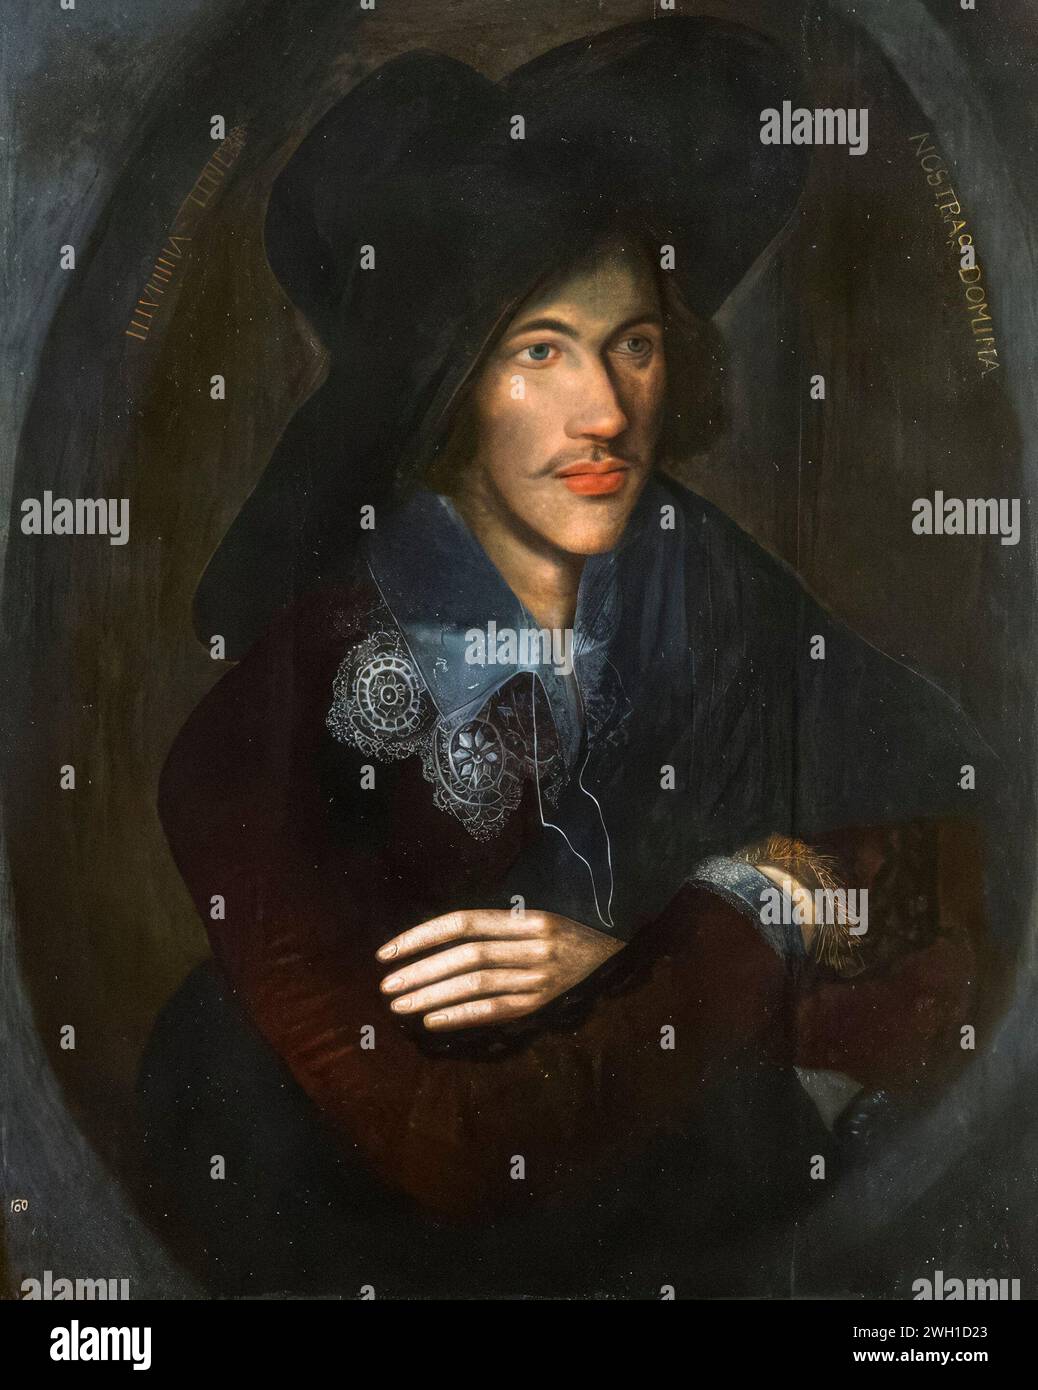 John Donne (1571 or 1572-1631), as a young man. English poet and Cleric in the Church of England, portrait painting in oil on panel, circa 1595 Stock Photo